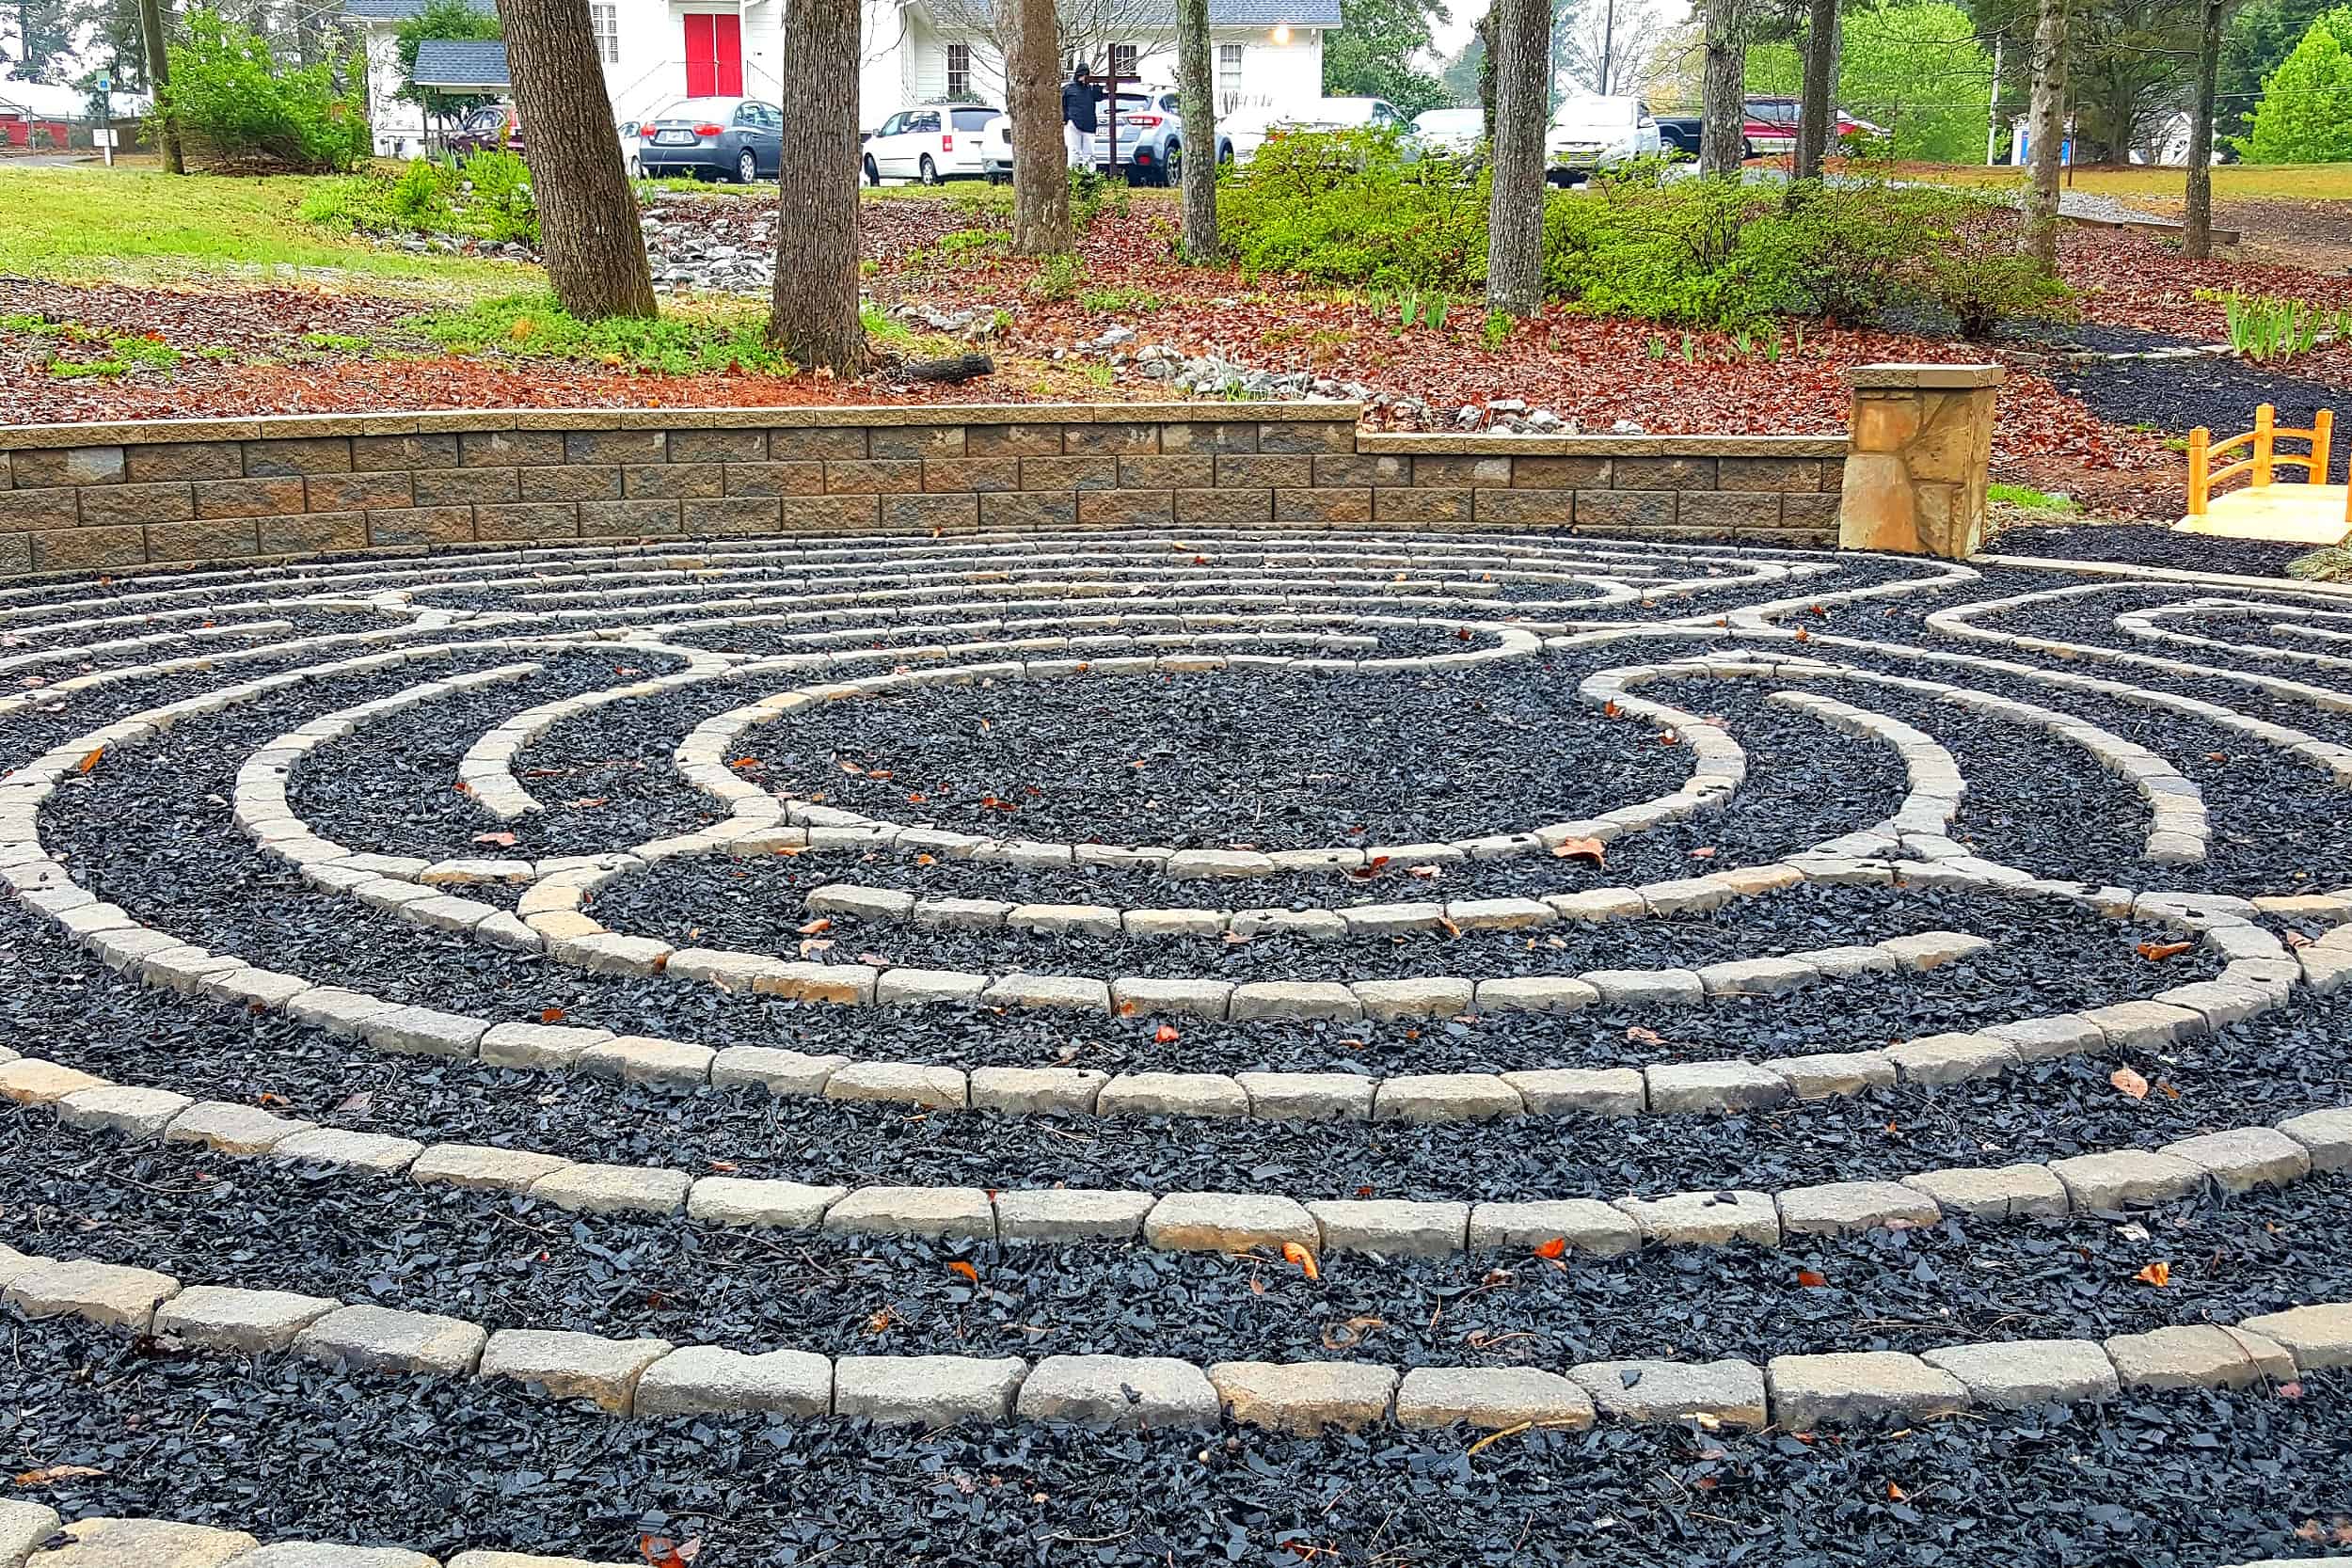 Landscape for Church outdoor labyrinth on Palm Sunday in Winder